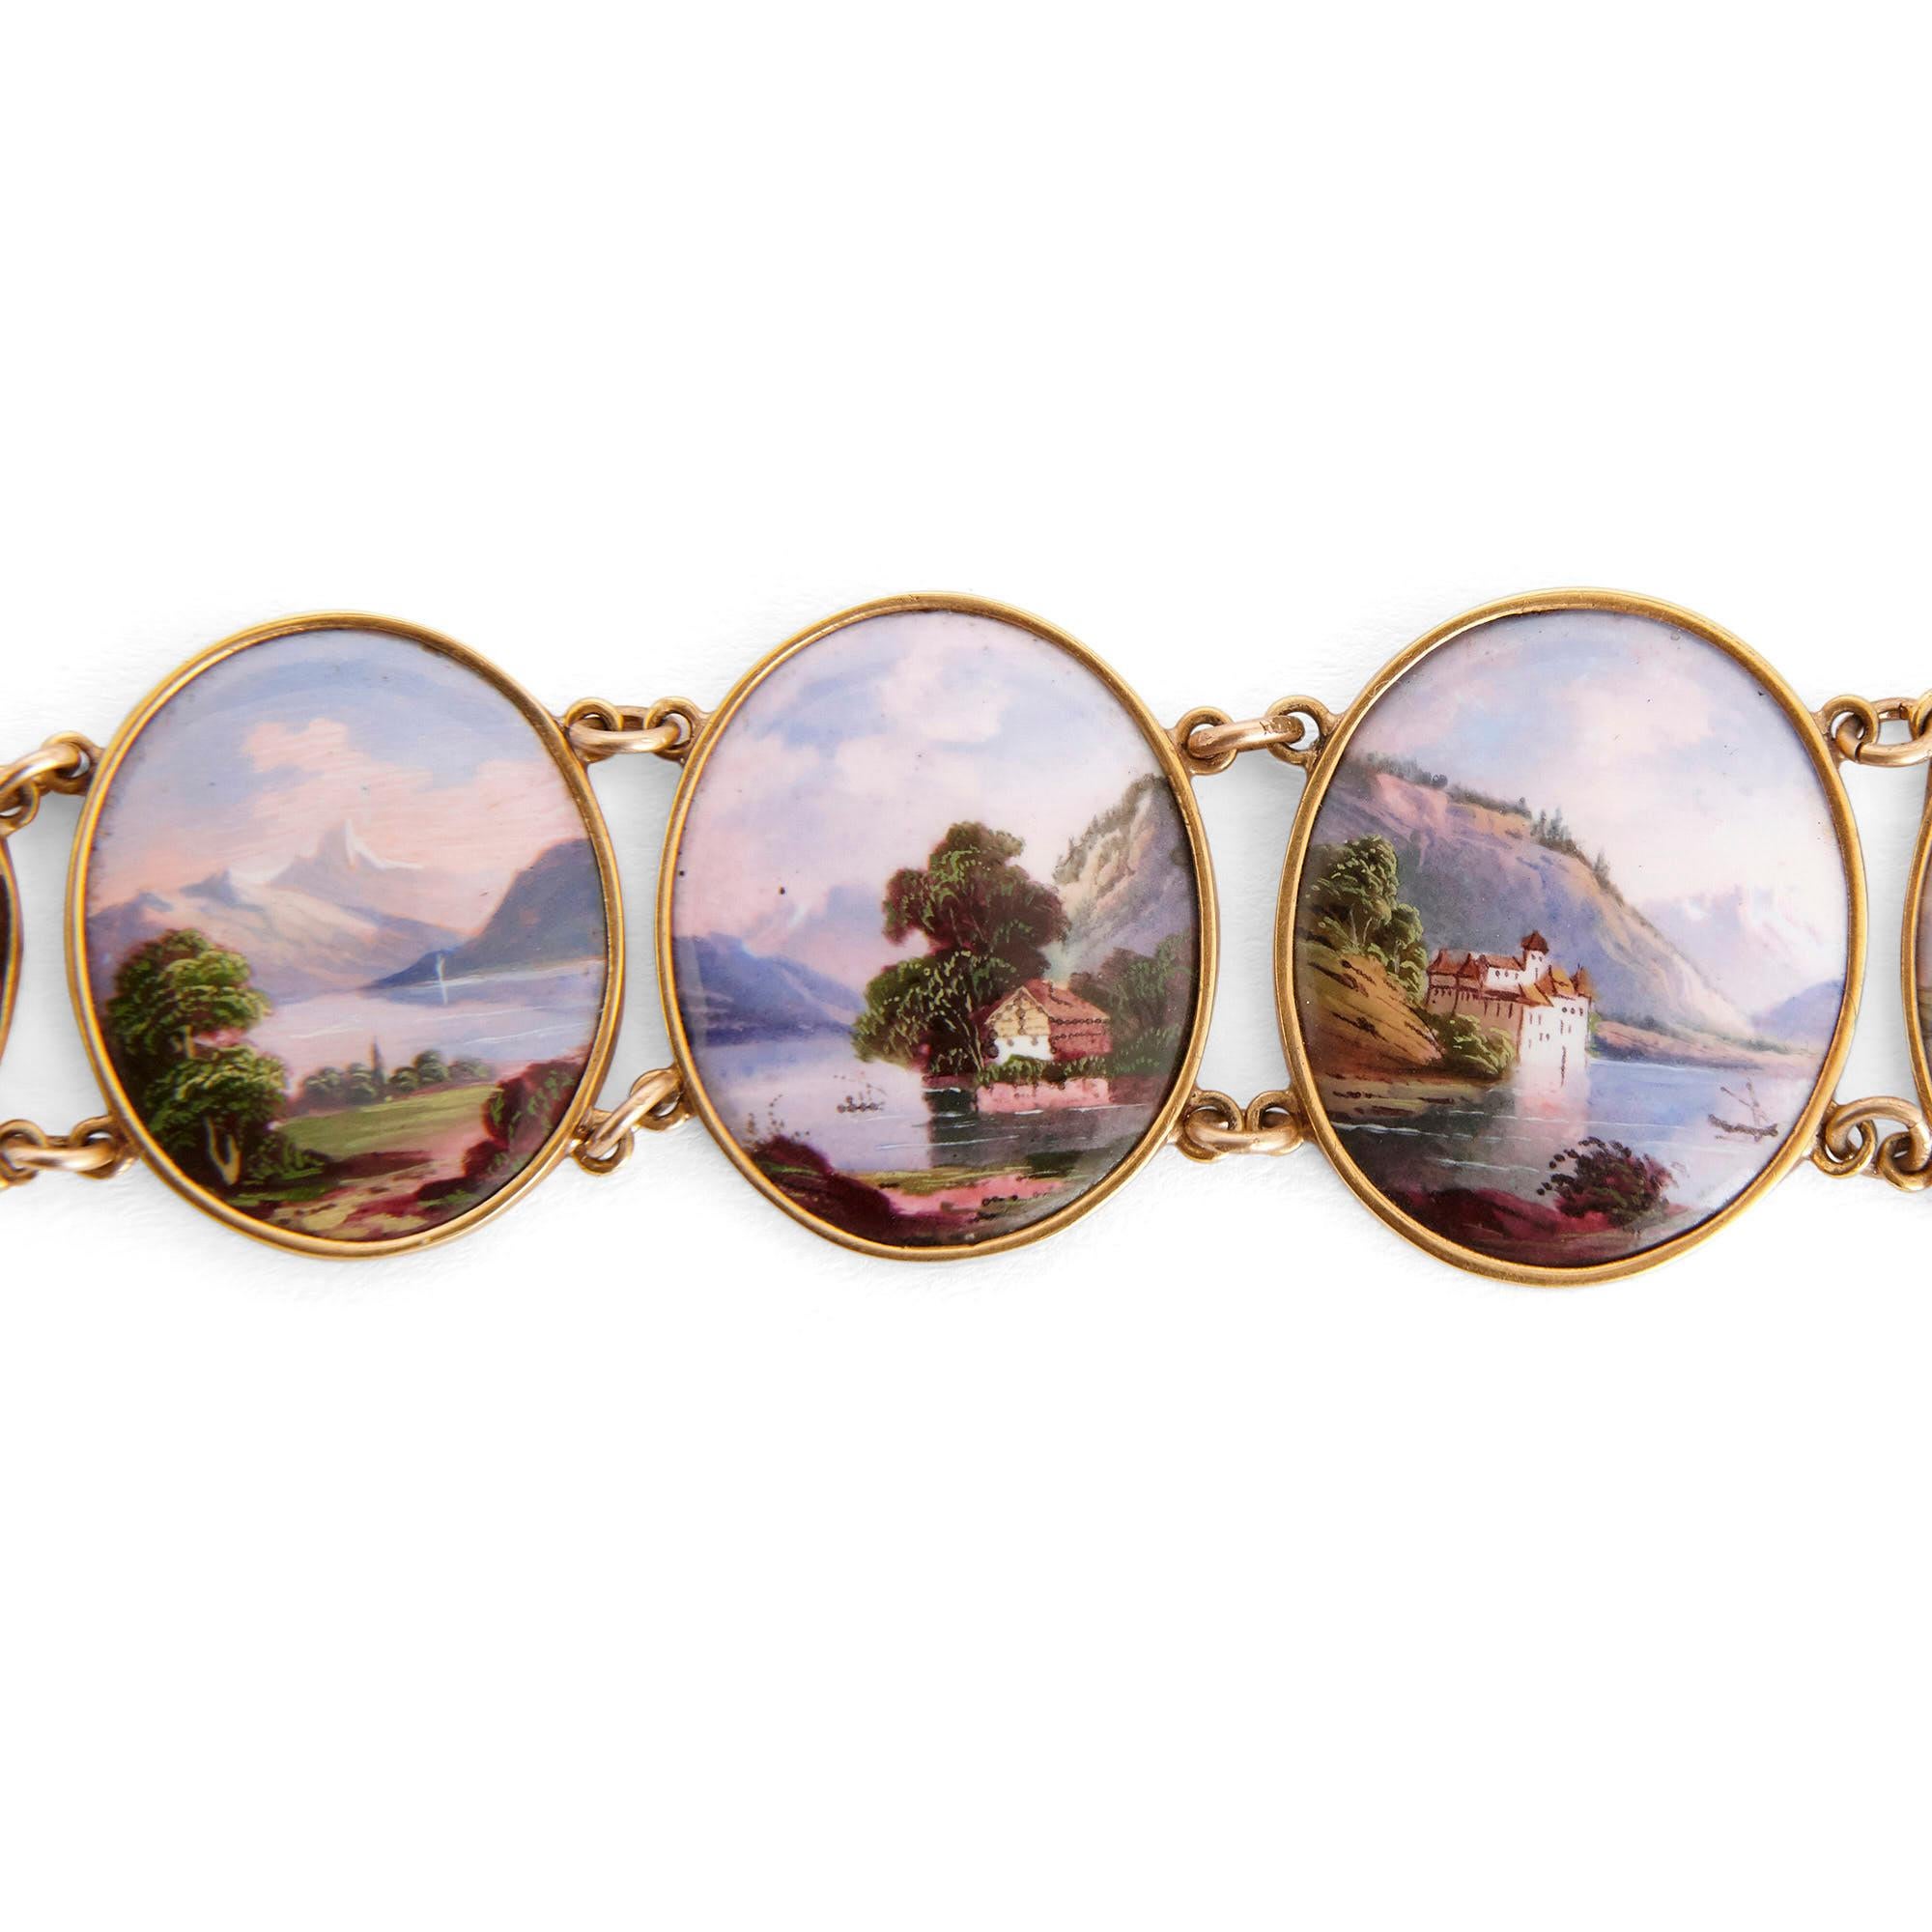 This seven-link bracelet, each link containing a painted landscape miniature on enamel, is crafted from yellow gold. Each of the miniatures portrays a Swiss landscape, whether an alpine scene or a view of a lakeside, with each of the paintings